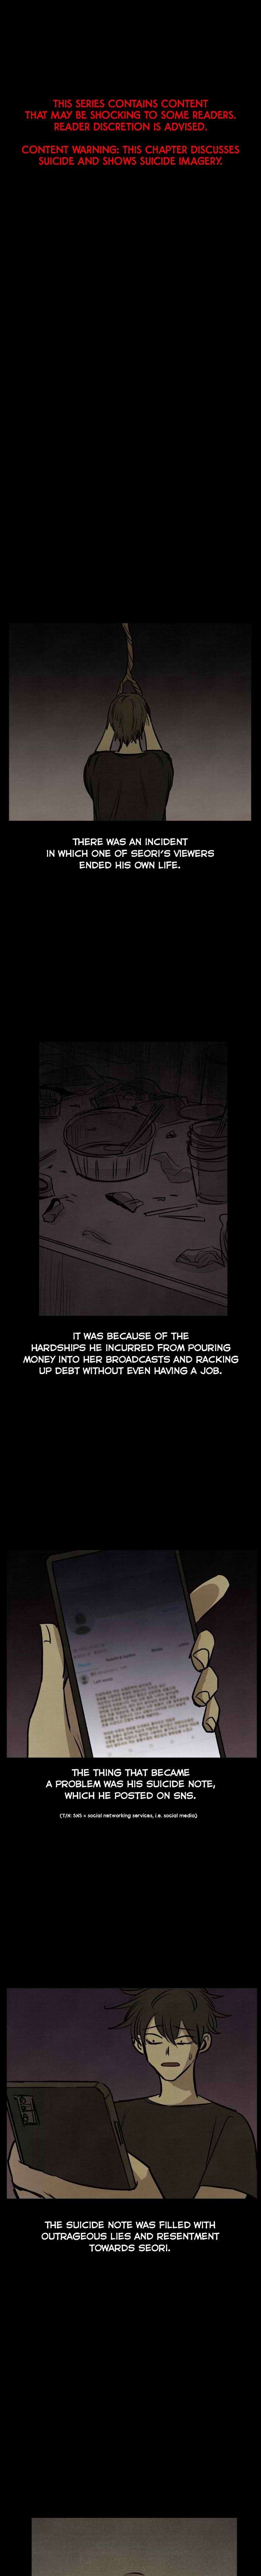 Devil’s Editing Chapter 14 - Page 1